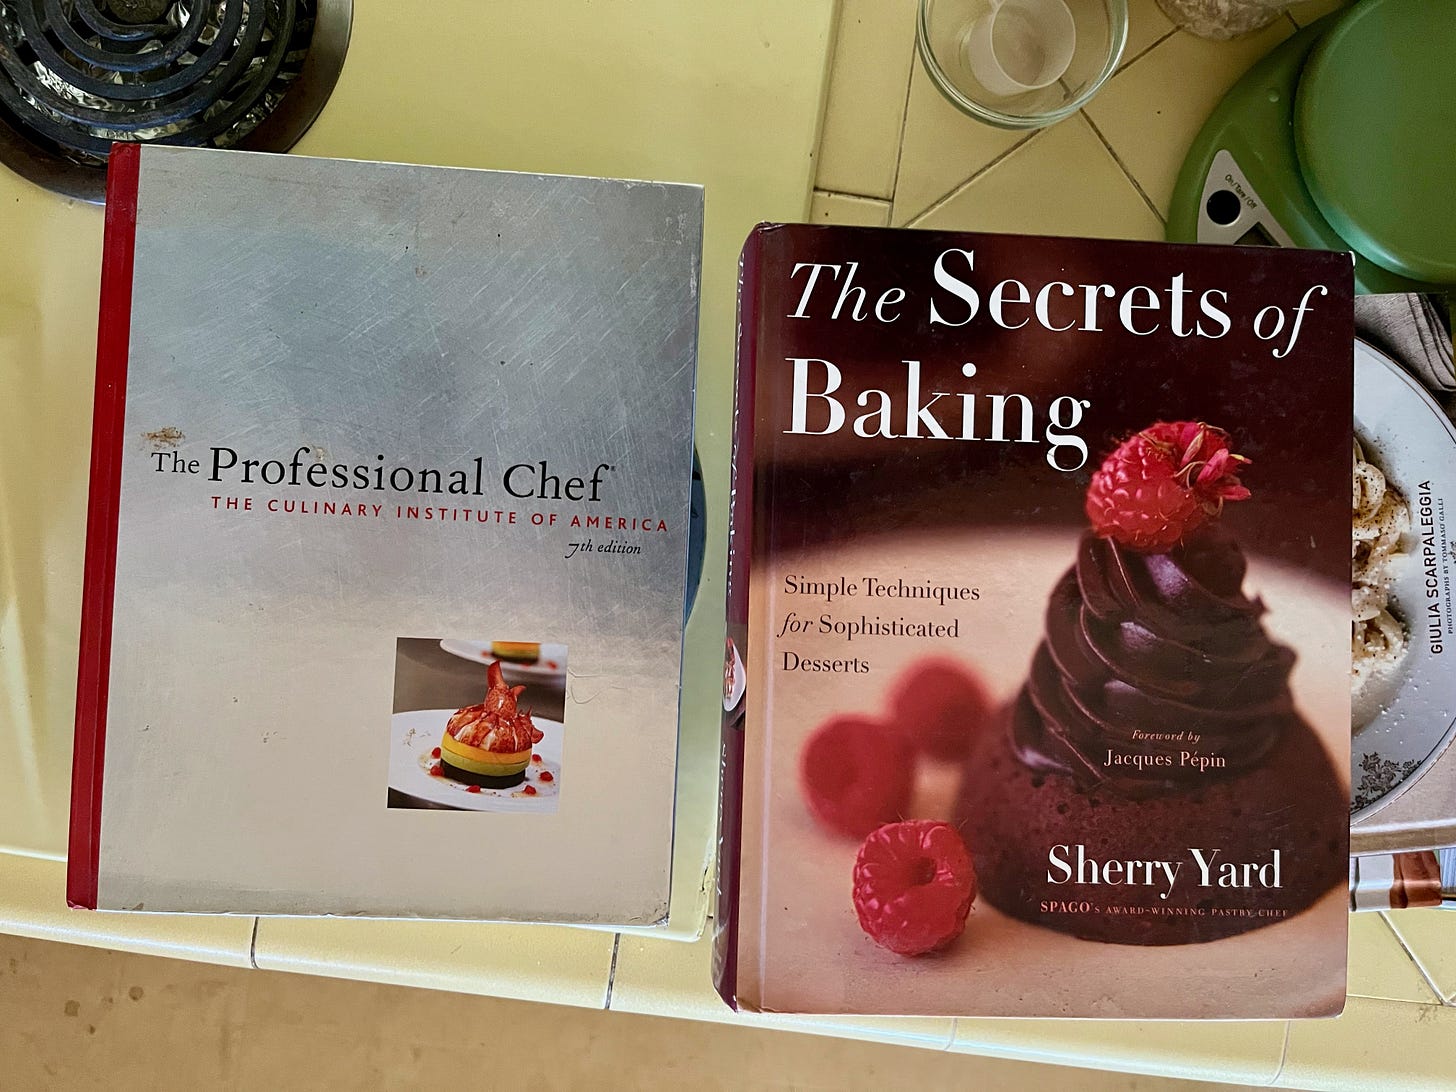 The Secrets of Baking (2003) by Sherry Yard and The Professional Chef (2001 edition) by Culinary Institute of America